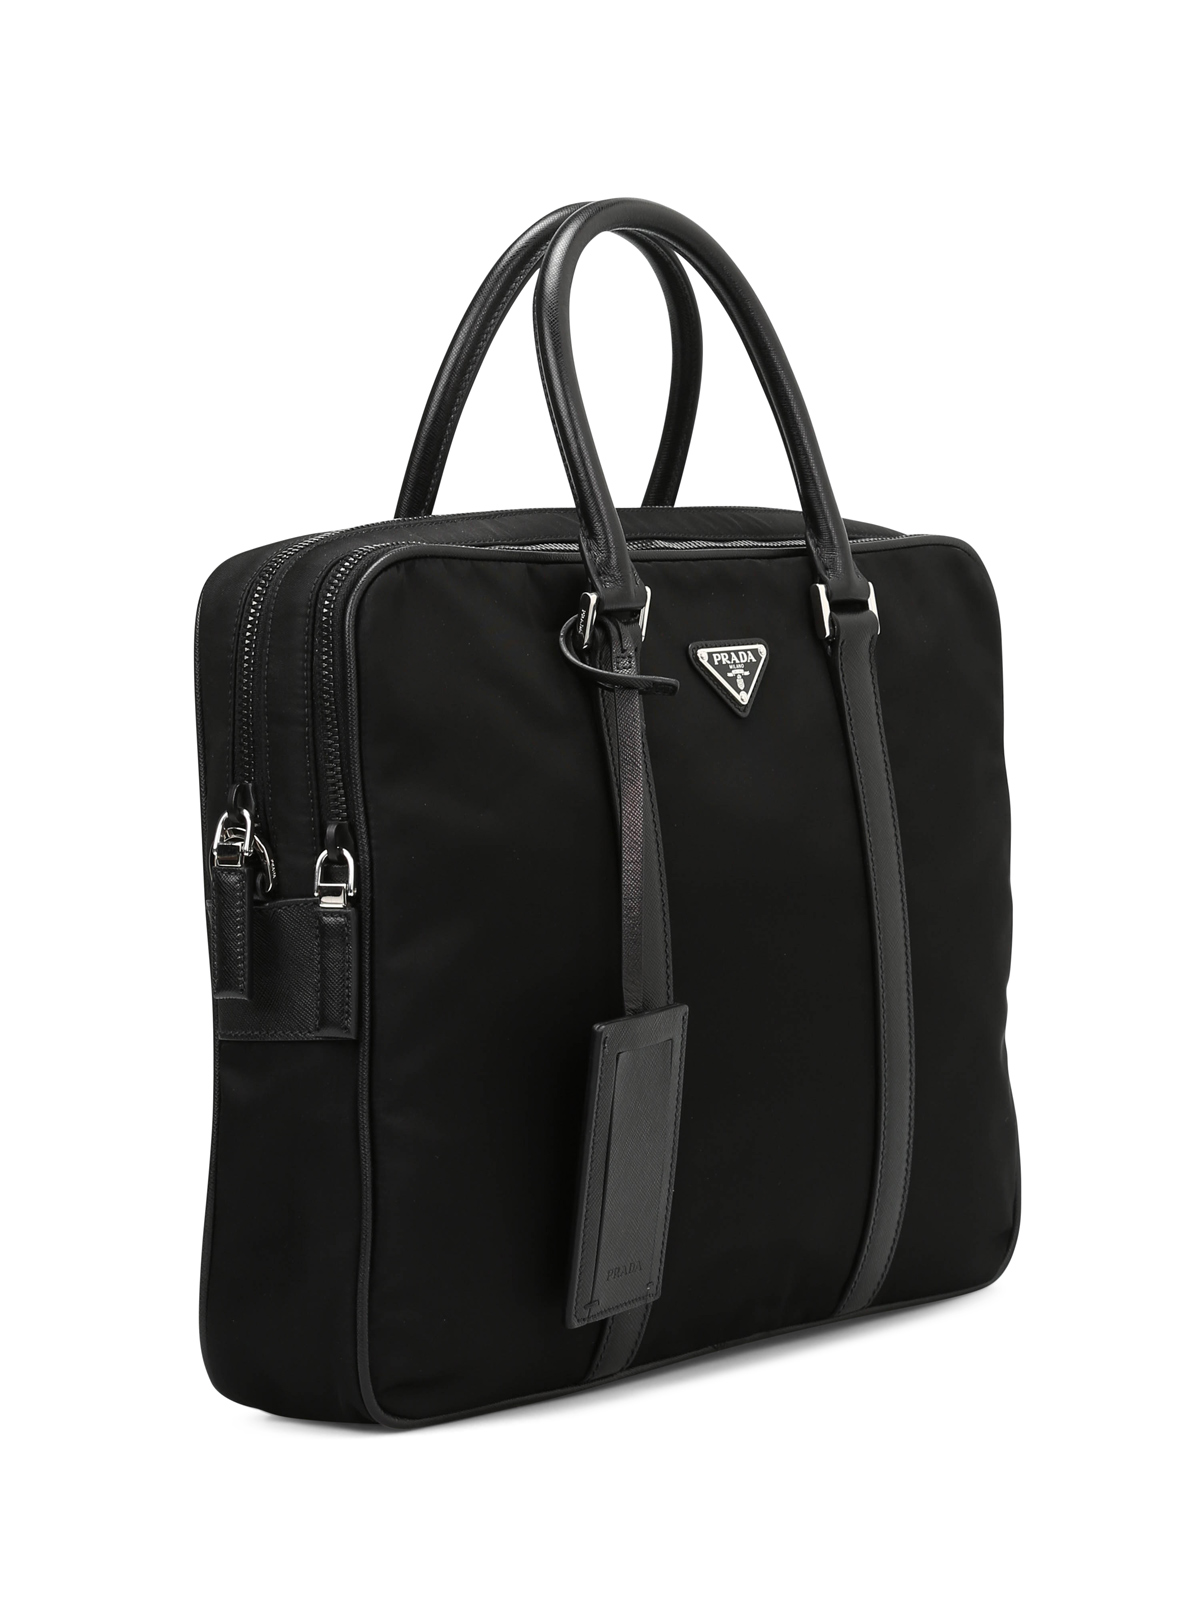 Laptop bags & briefcases Prada - Nylon and leather laptop bag - 2VE407064002